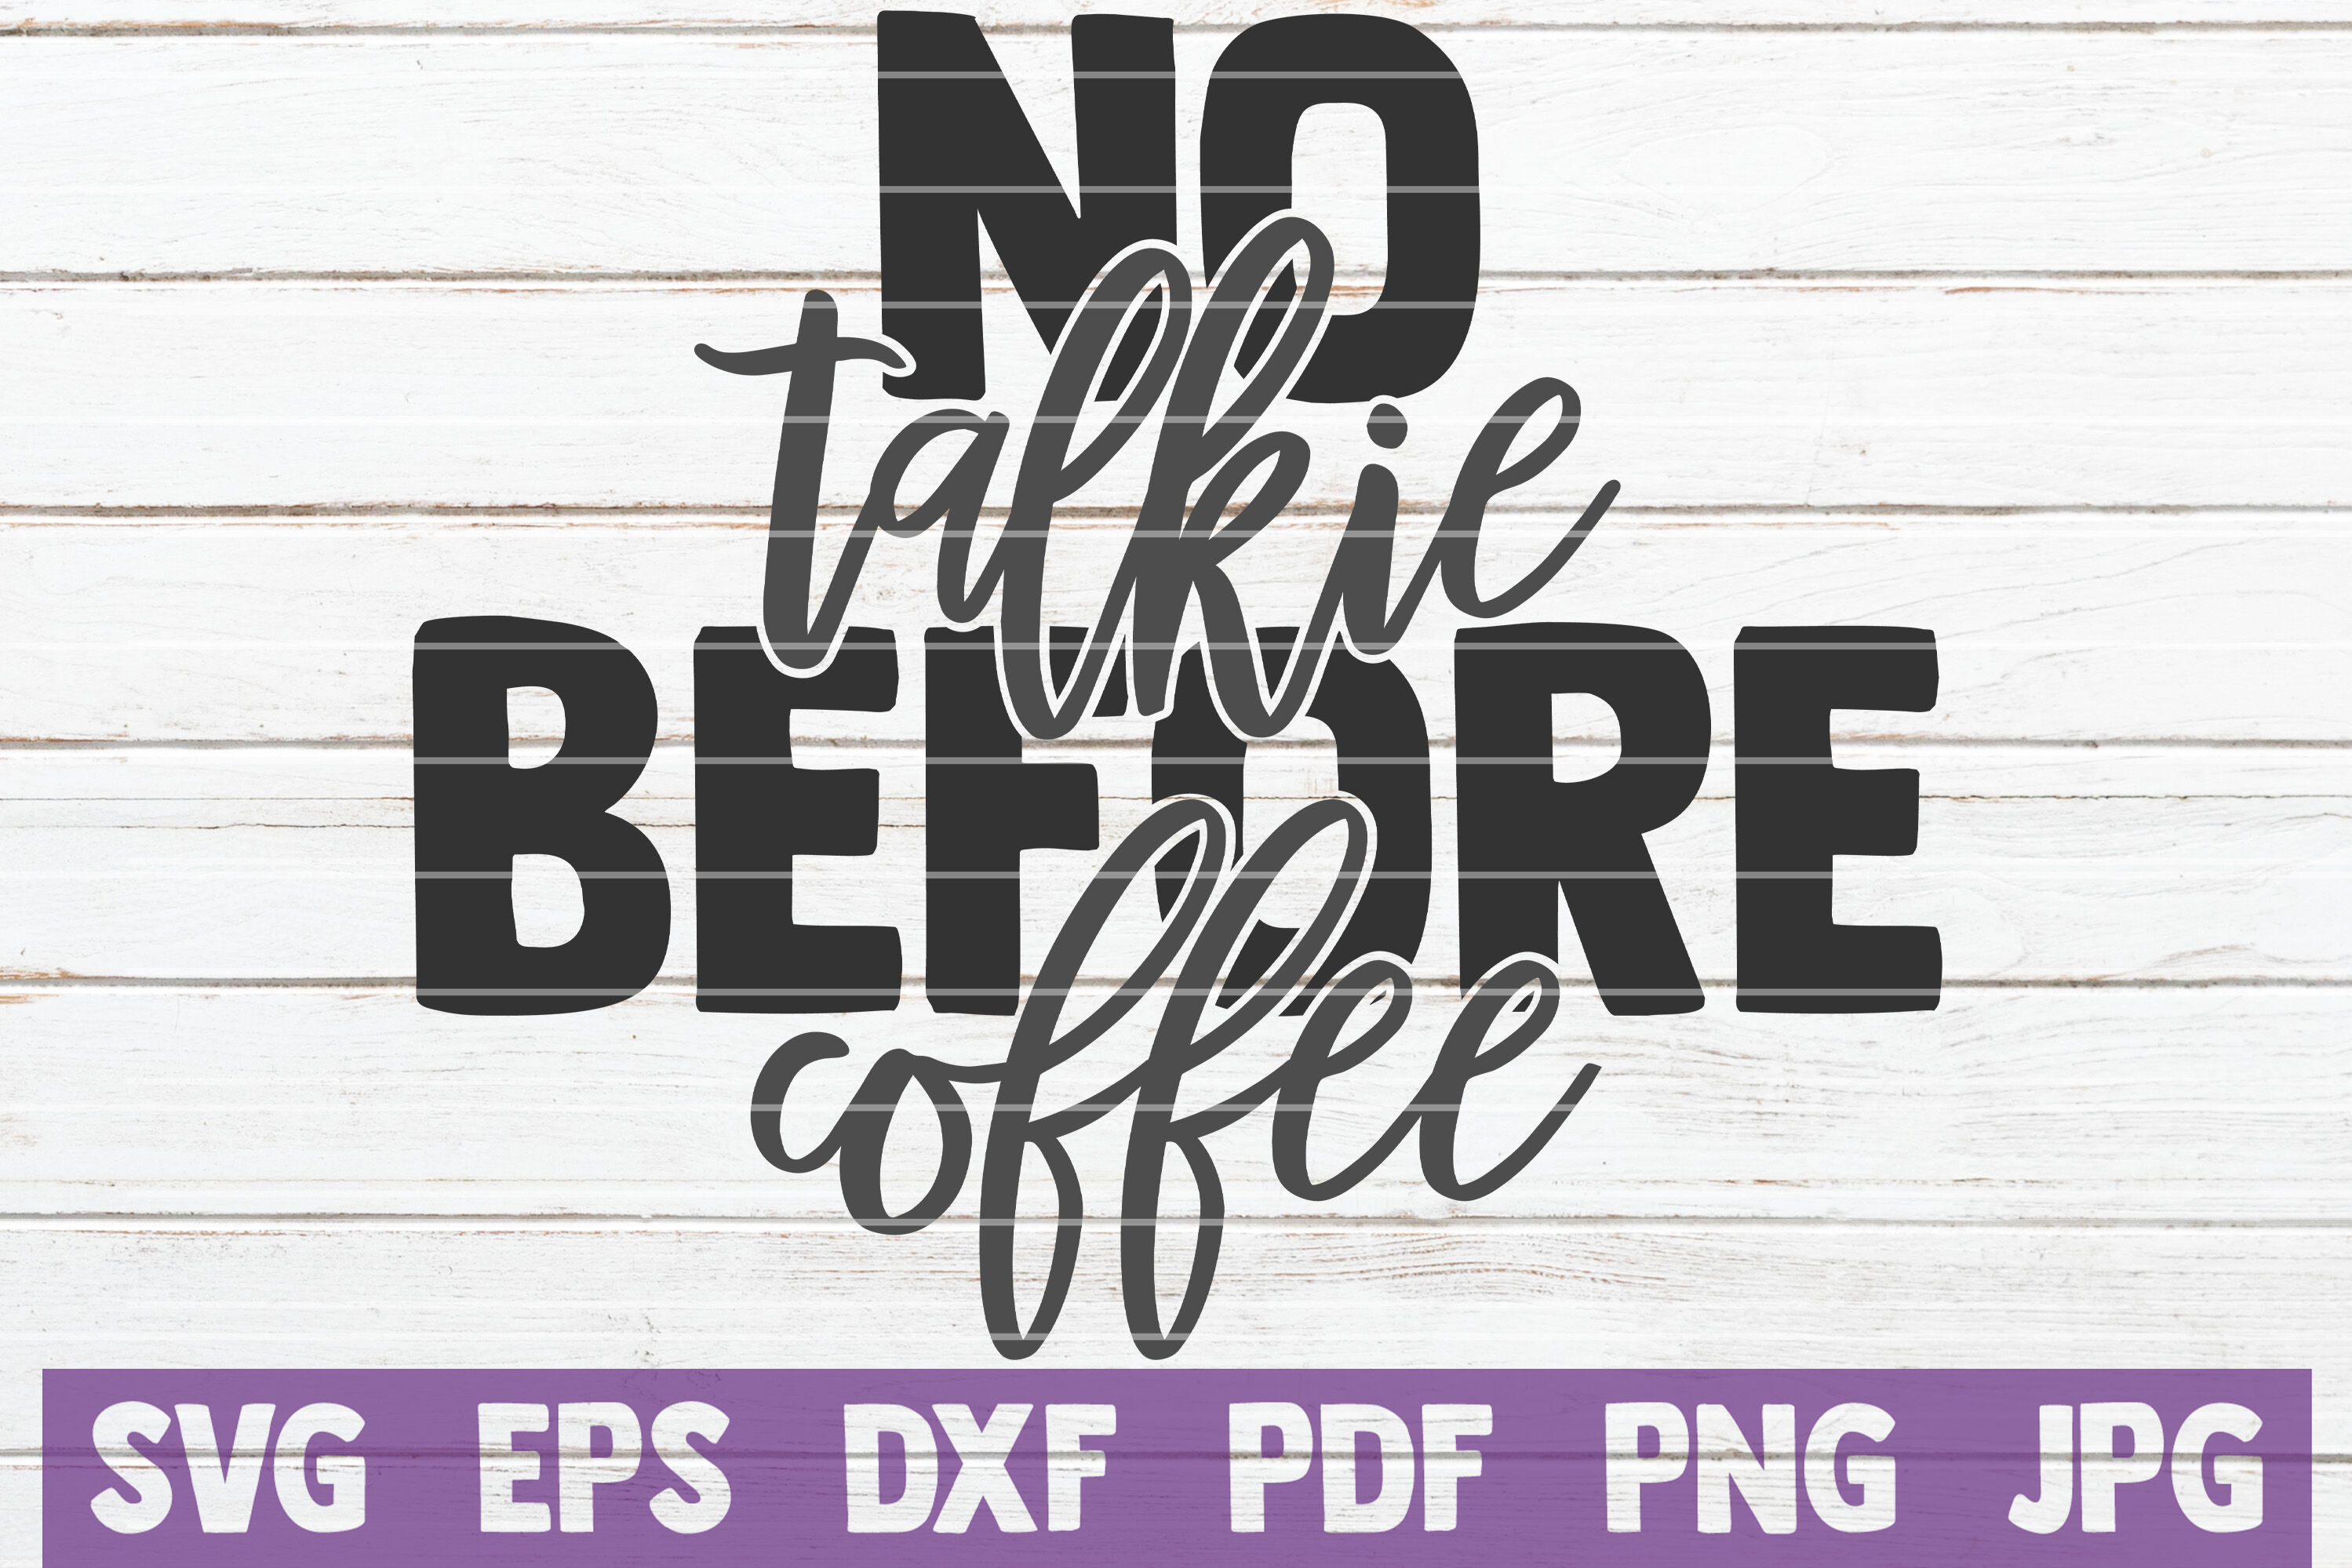 Free Free 225 Coffee Before Talkie Svg SVG PNG EPS DXF File